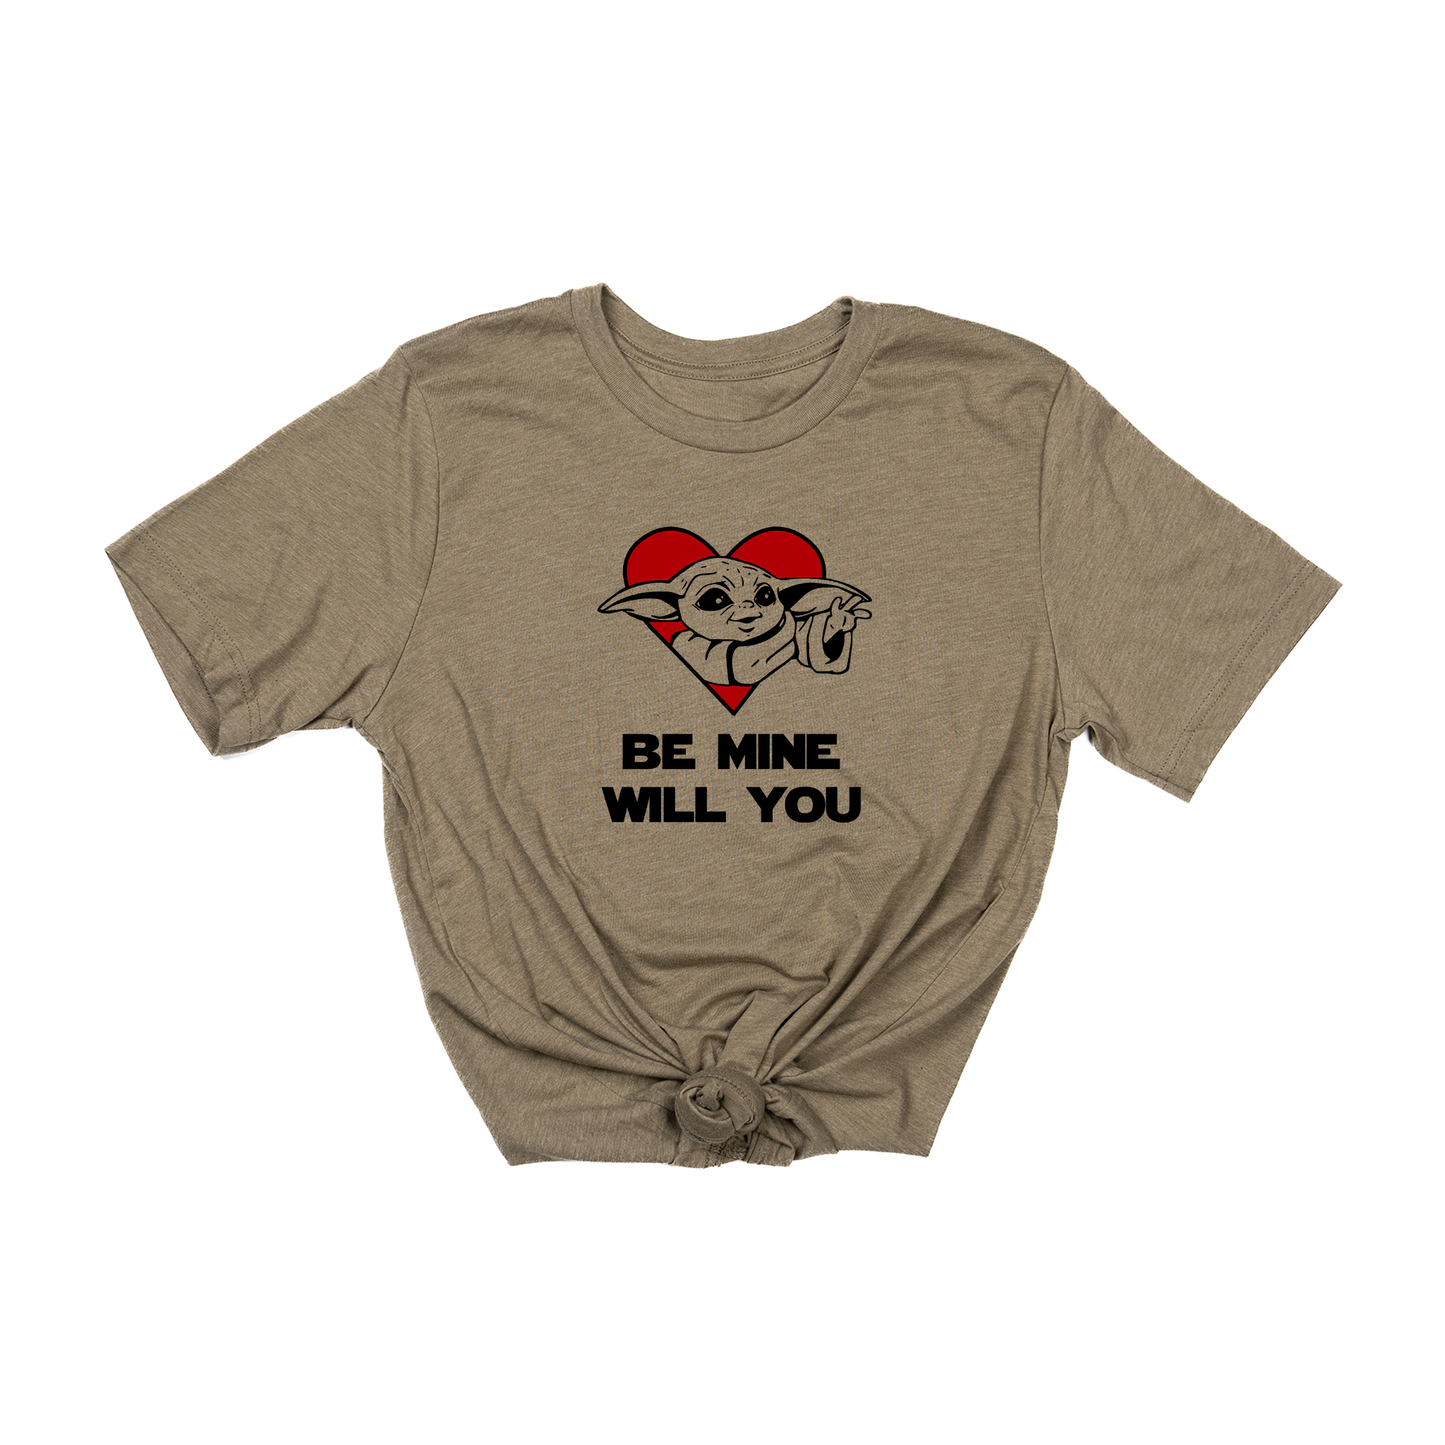 Be Mine Will You (Baby Yoda Inspired,  Across Front) - Tee (Olive)